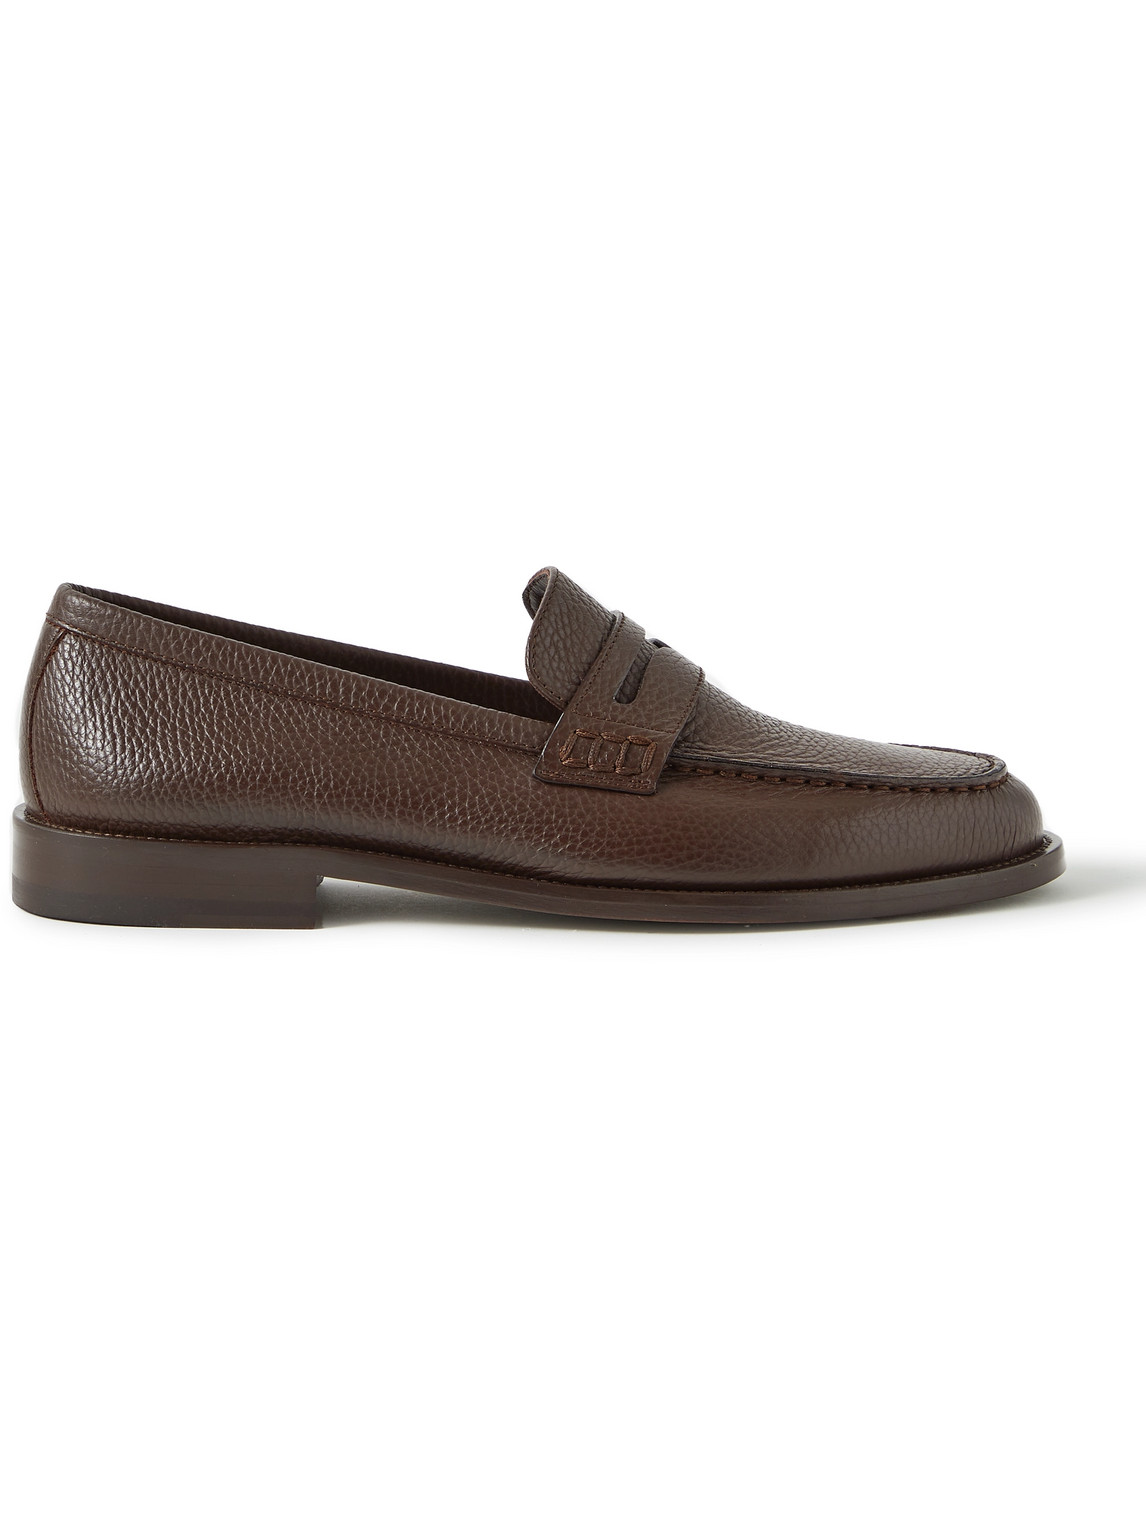 Manolo Blahnik Perry Full-grain Leather Penny Loafers In Brown